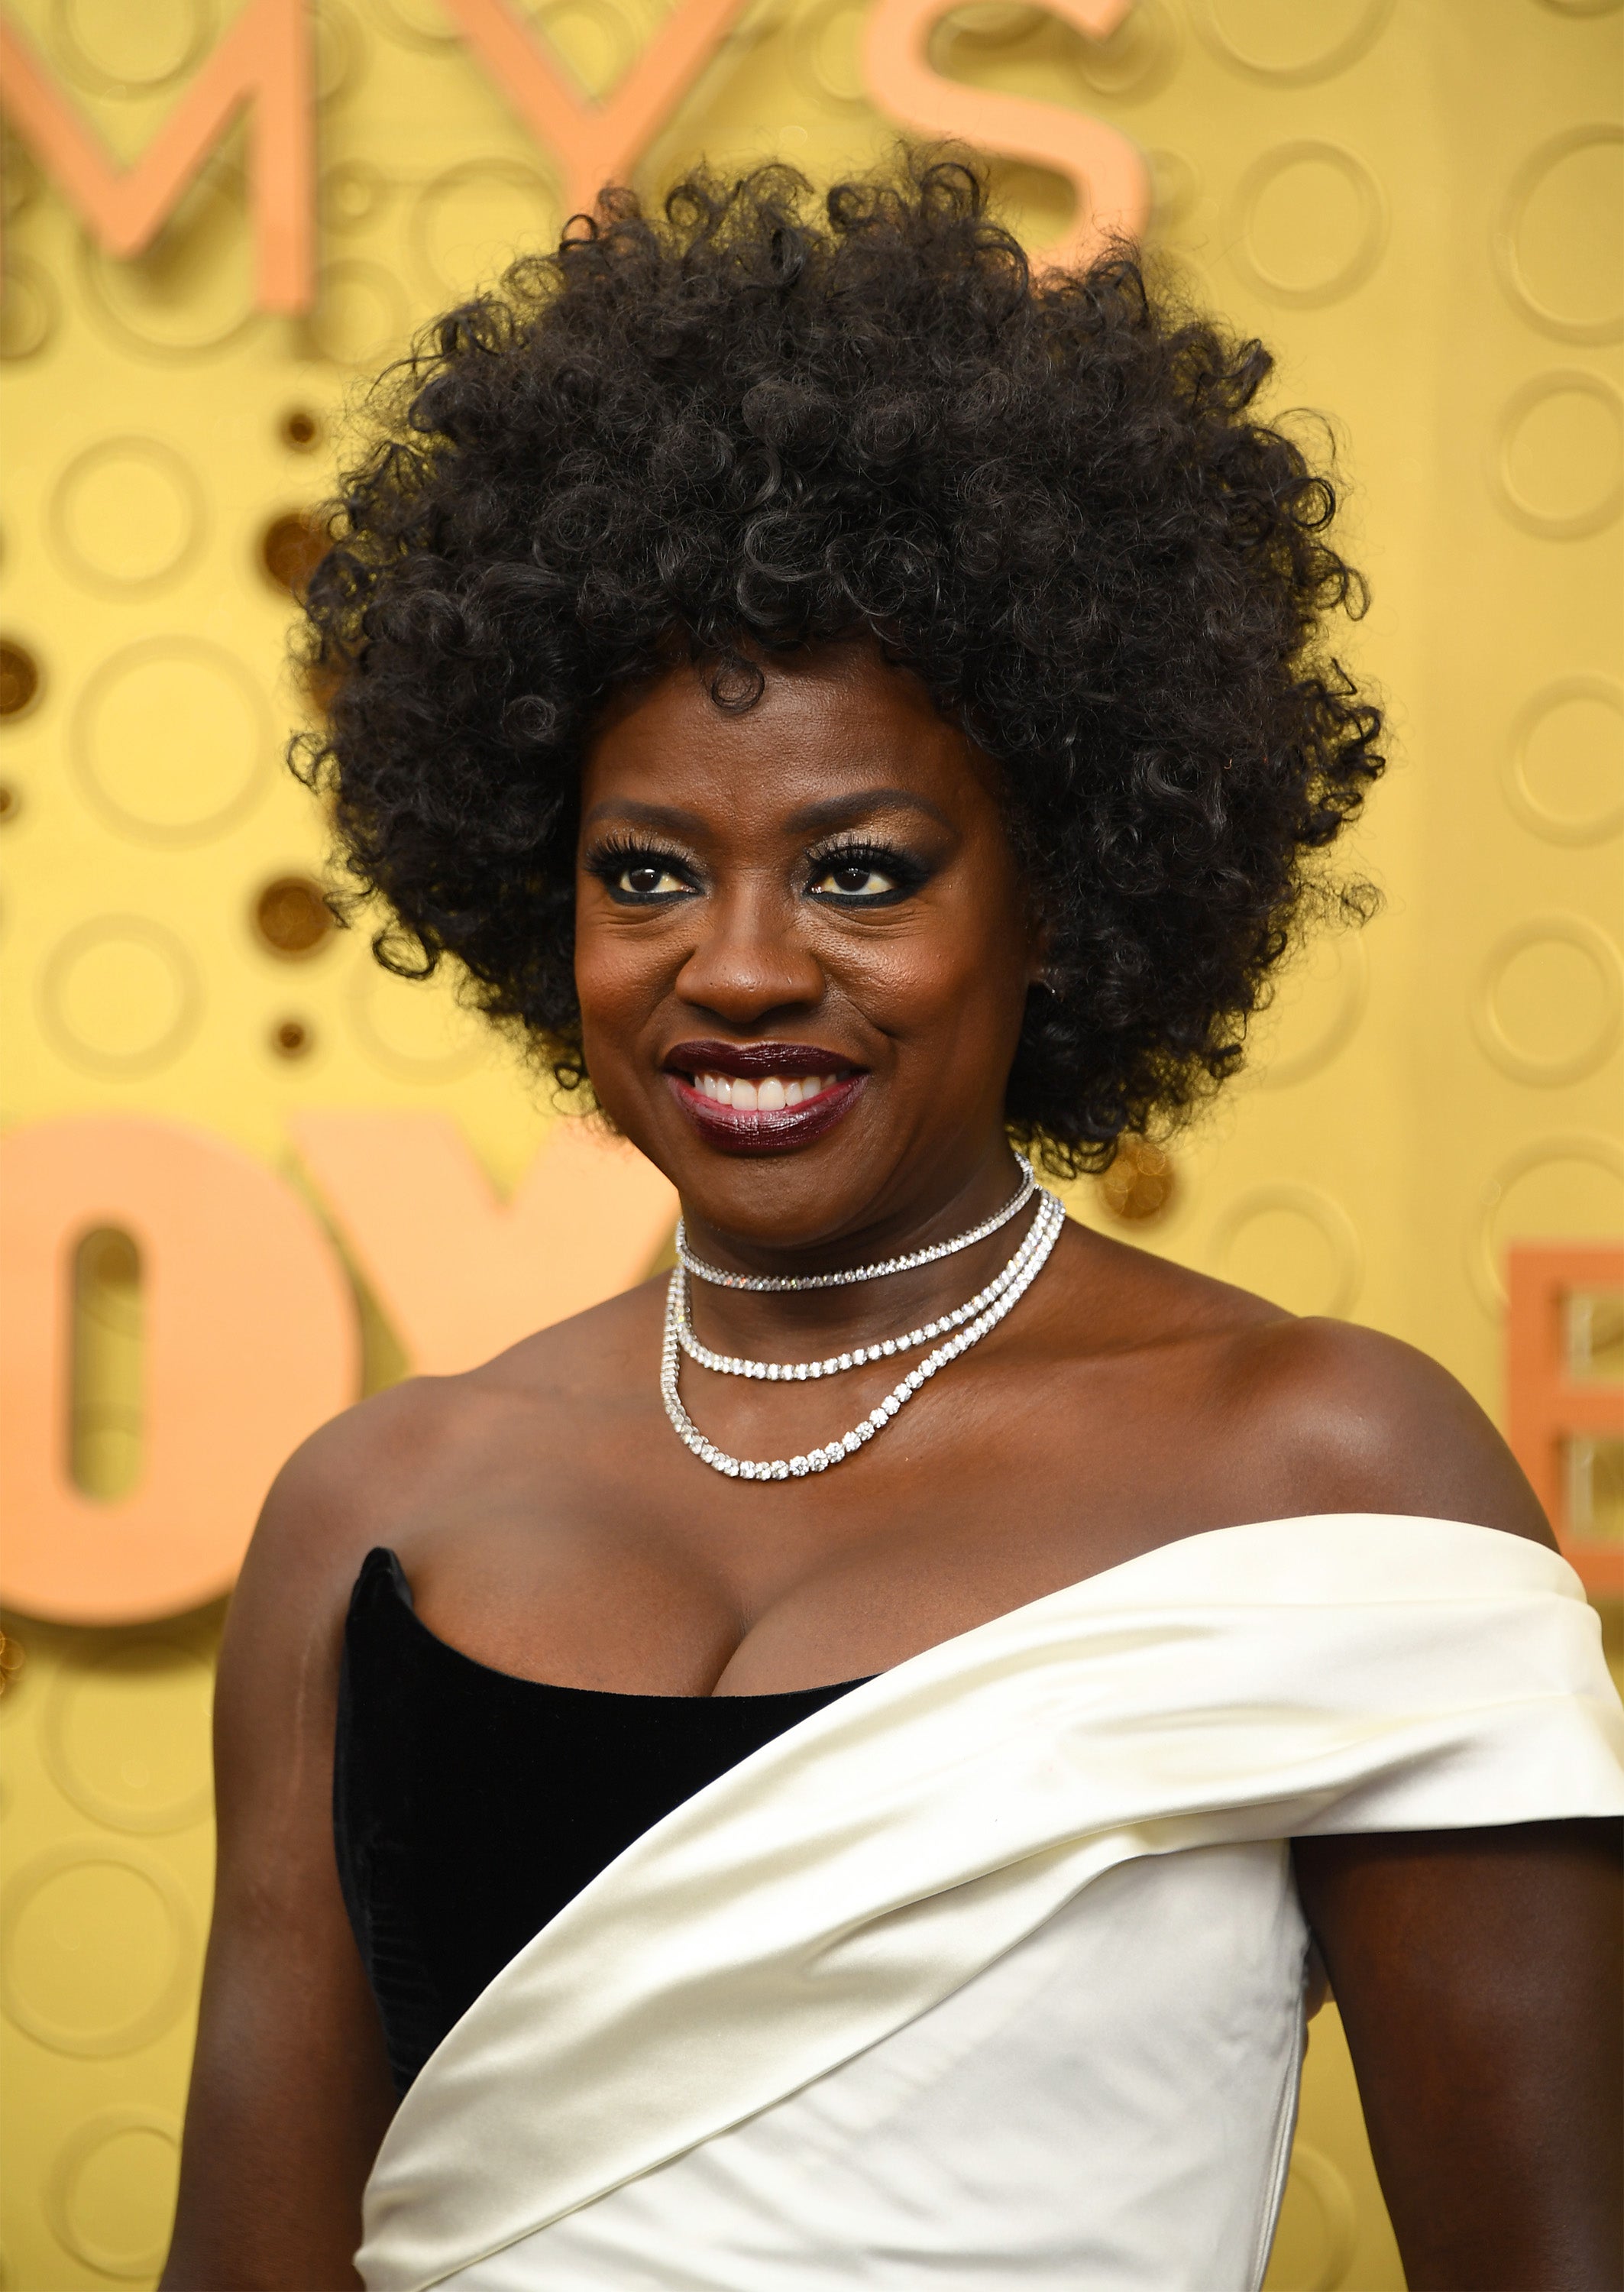 Red Carpet Beauty From The 2019 Emmy Awards